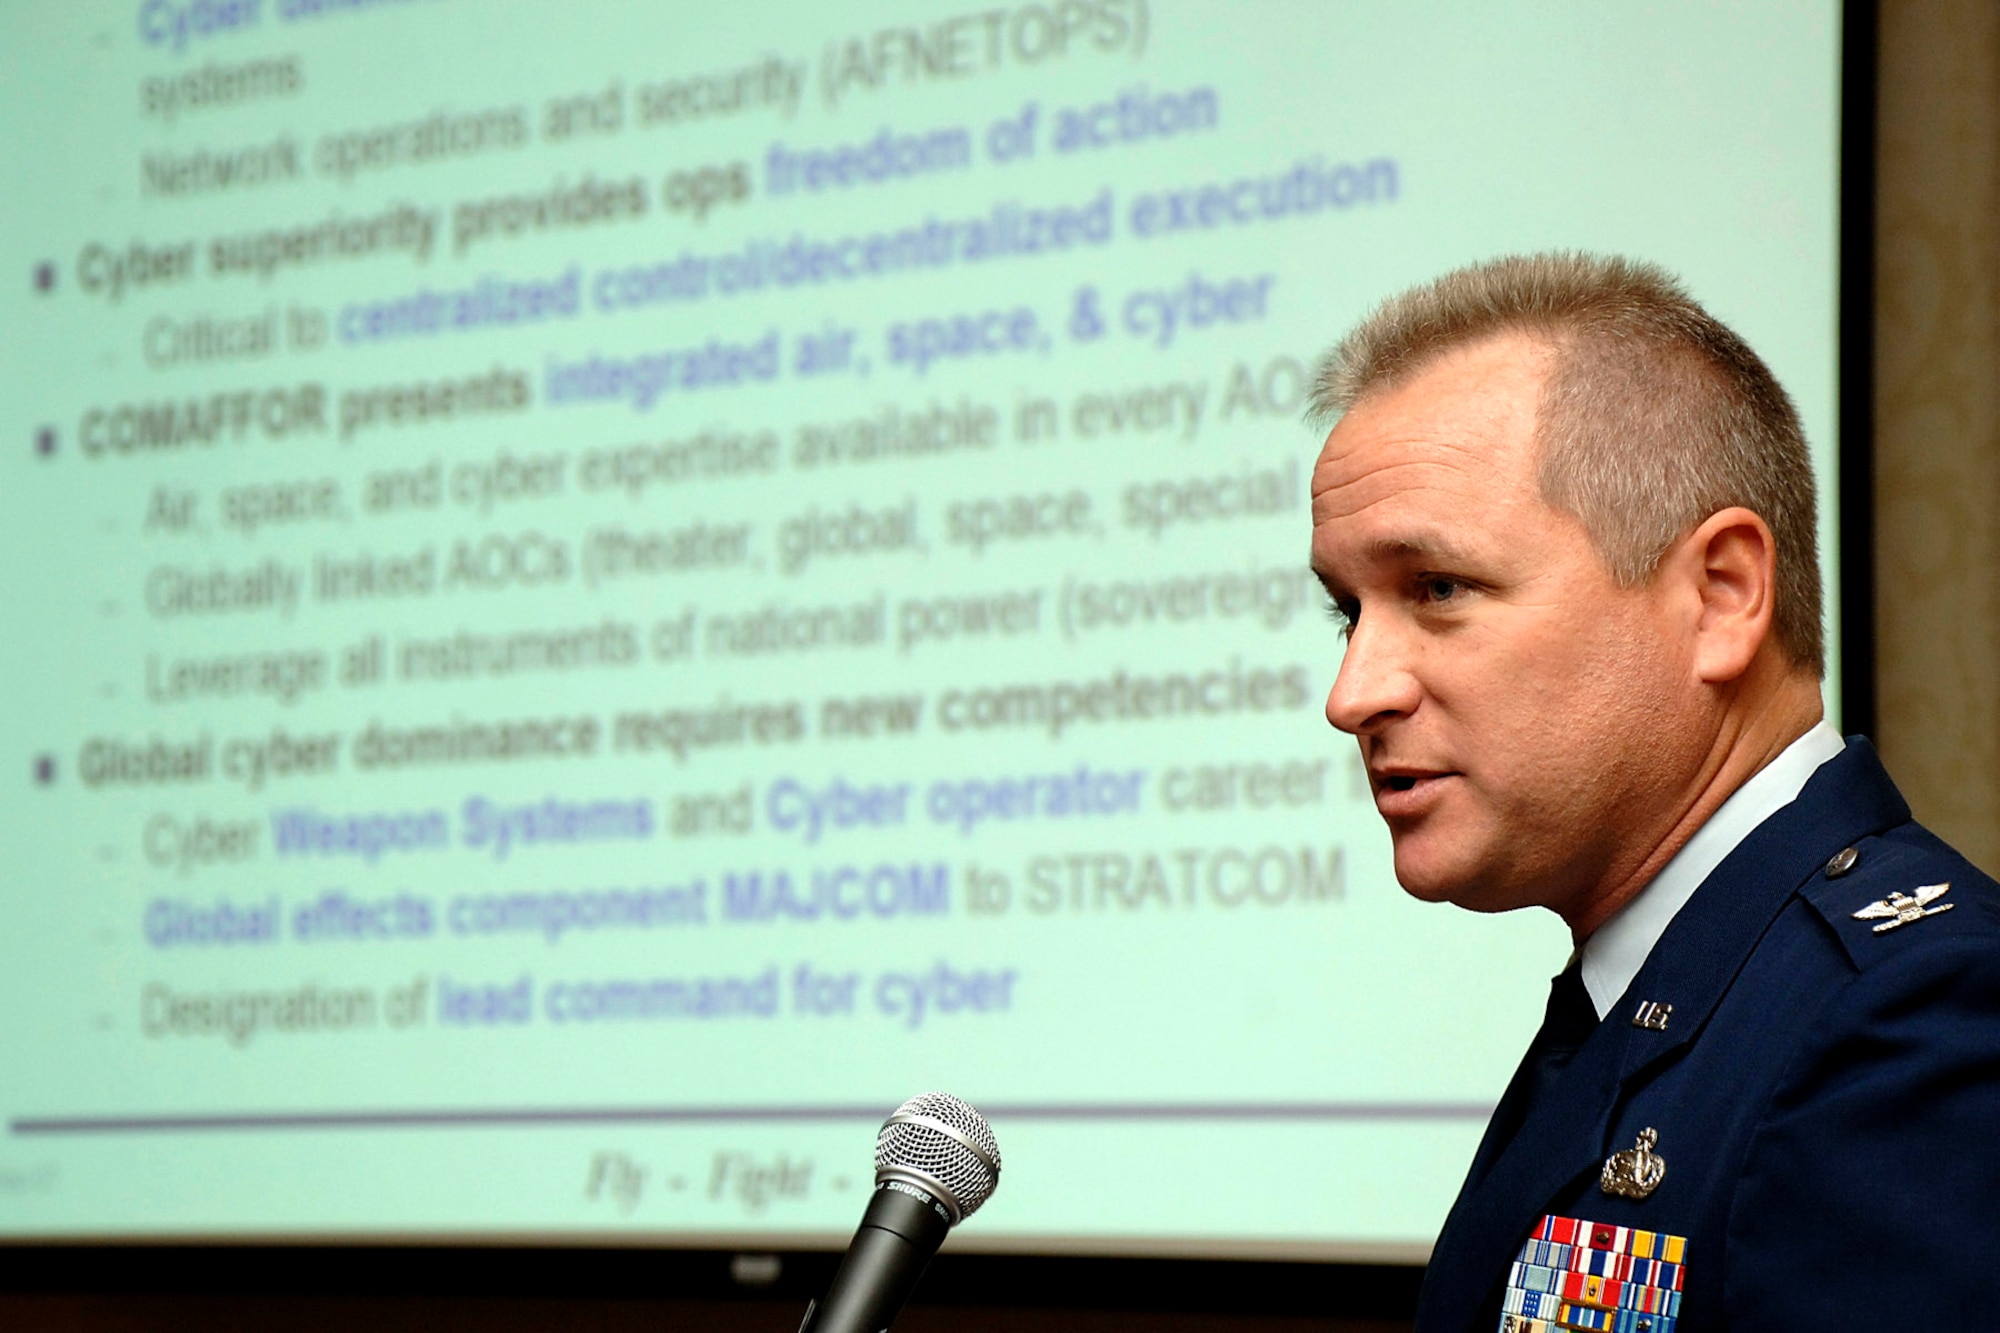 Col. Tony Buntyn addressed the Fifth Annual Net-Centric Operations Conference Sept. 24 in New Castle, N.H., focusing on the importance of controlling cyberspace.  Colonel Buntyn is the director of 8th Air Force's Global Cyberspace Air Operations Center at Barksdale Air Force Base, La.  (U.S. Air Force courtesy photo)